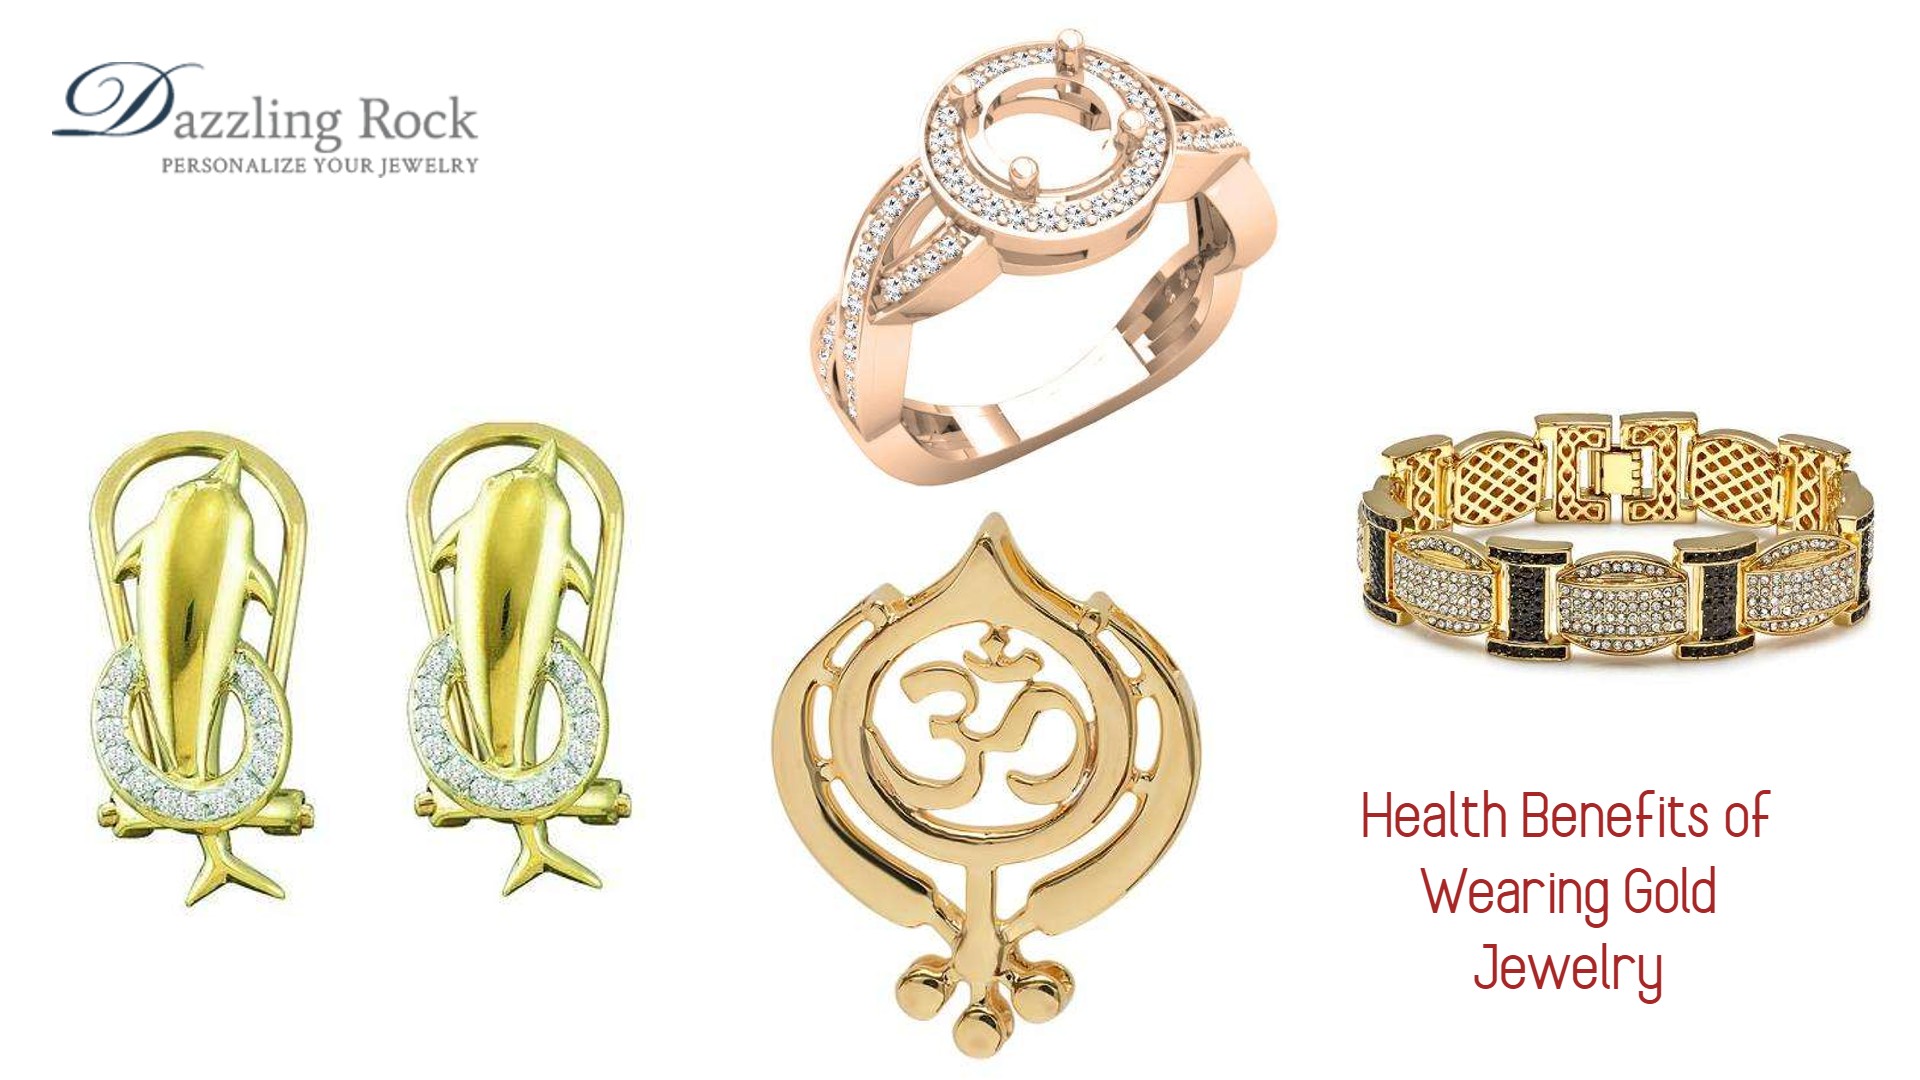 Health Benefits of Wearing Gold Jewelry